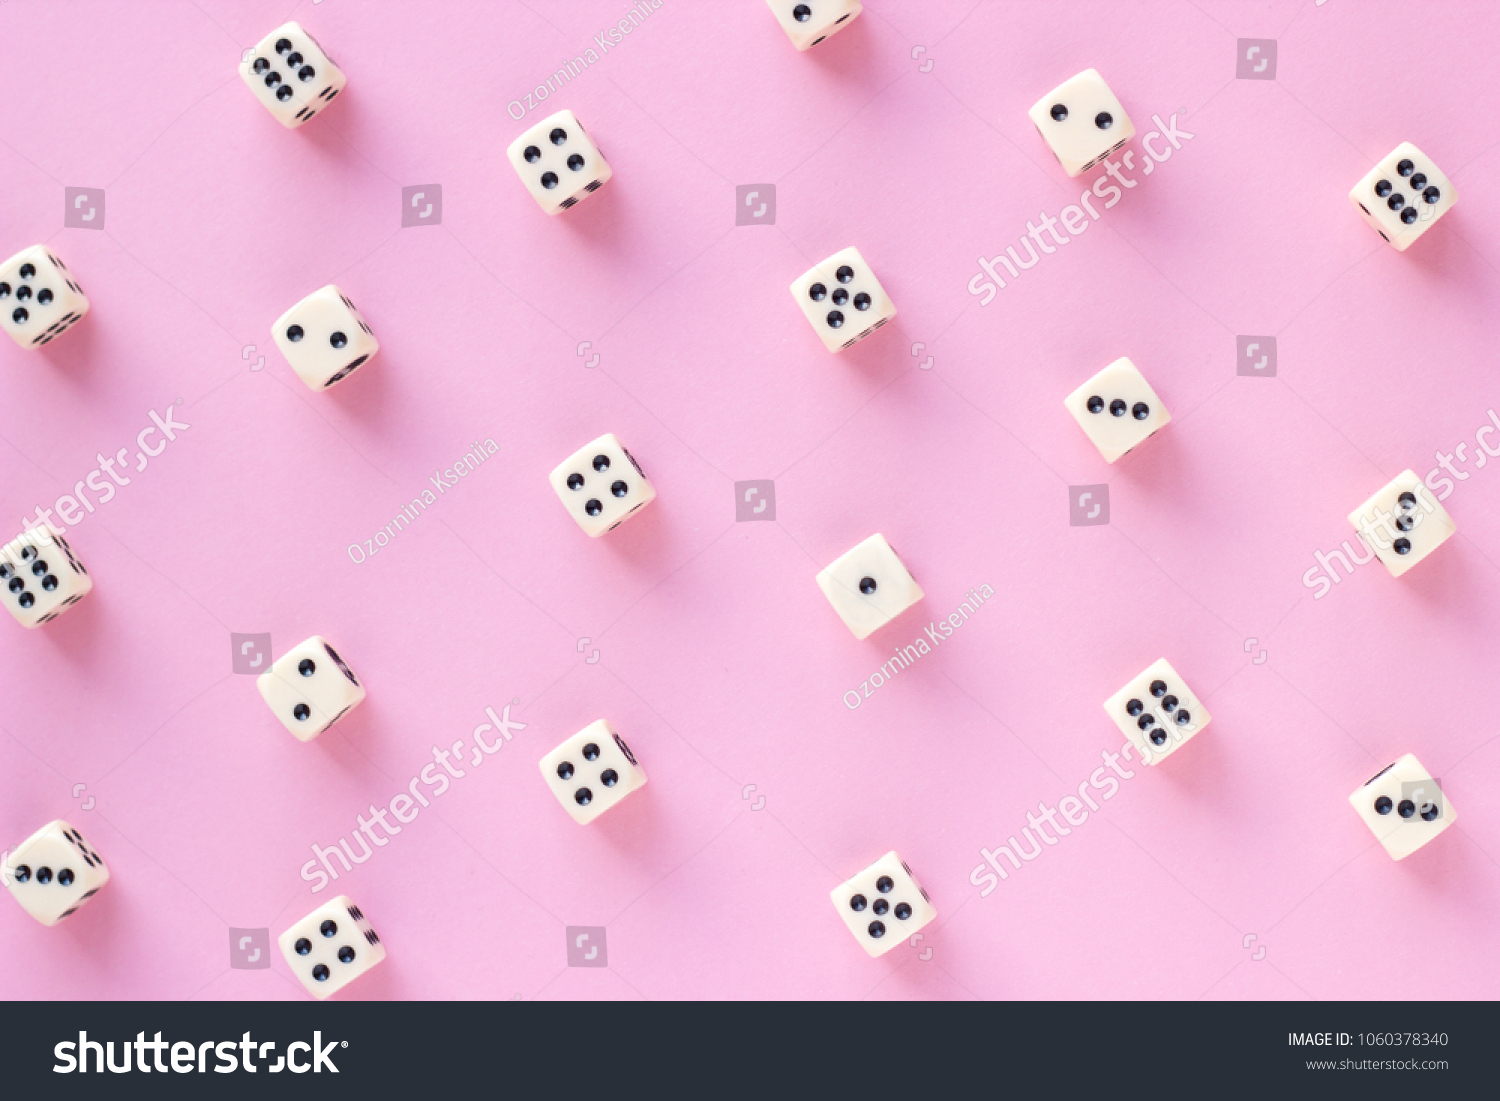 Gaming dice pattern on pink background in flat lay style. Concept for games, game board, presentation, banners or web. Top view. Close-up. #1060378340